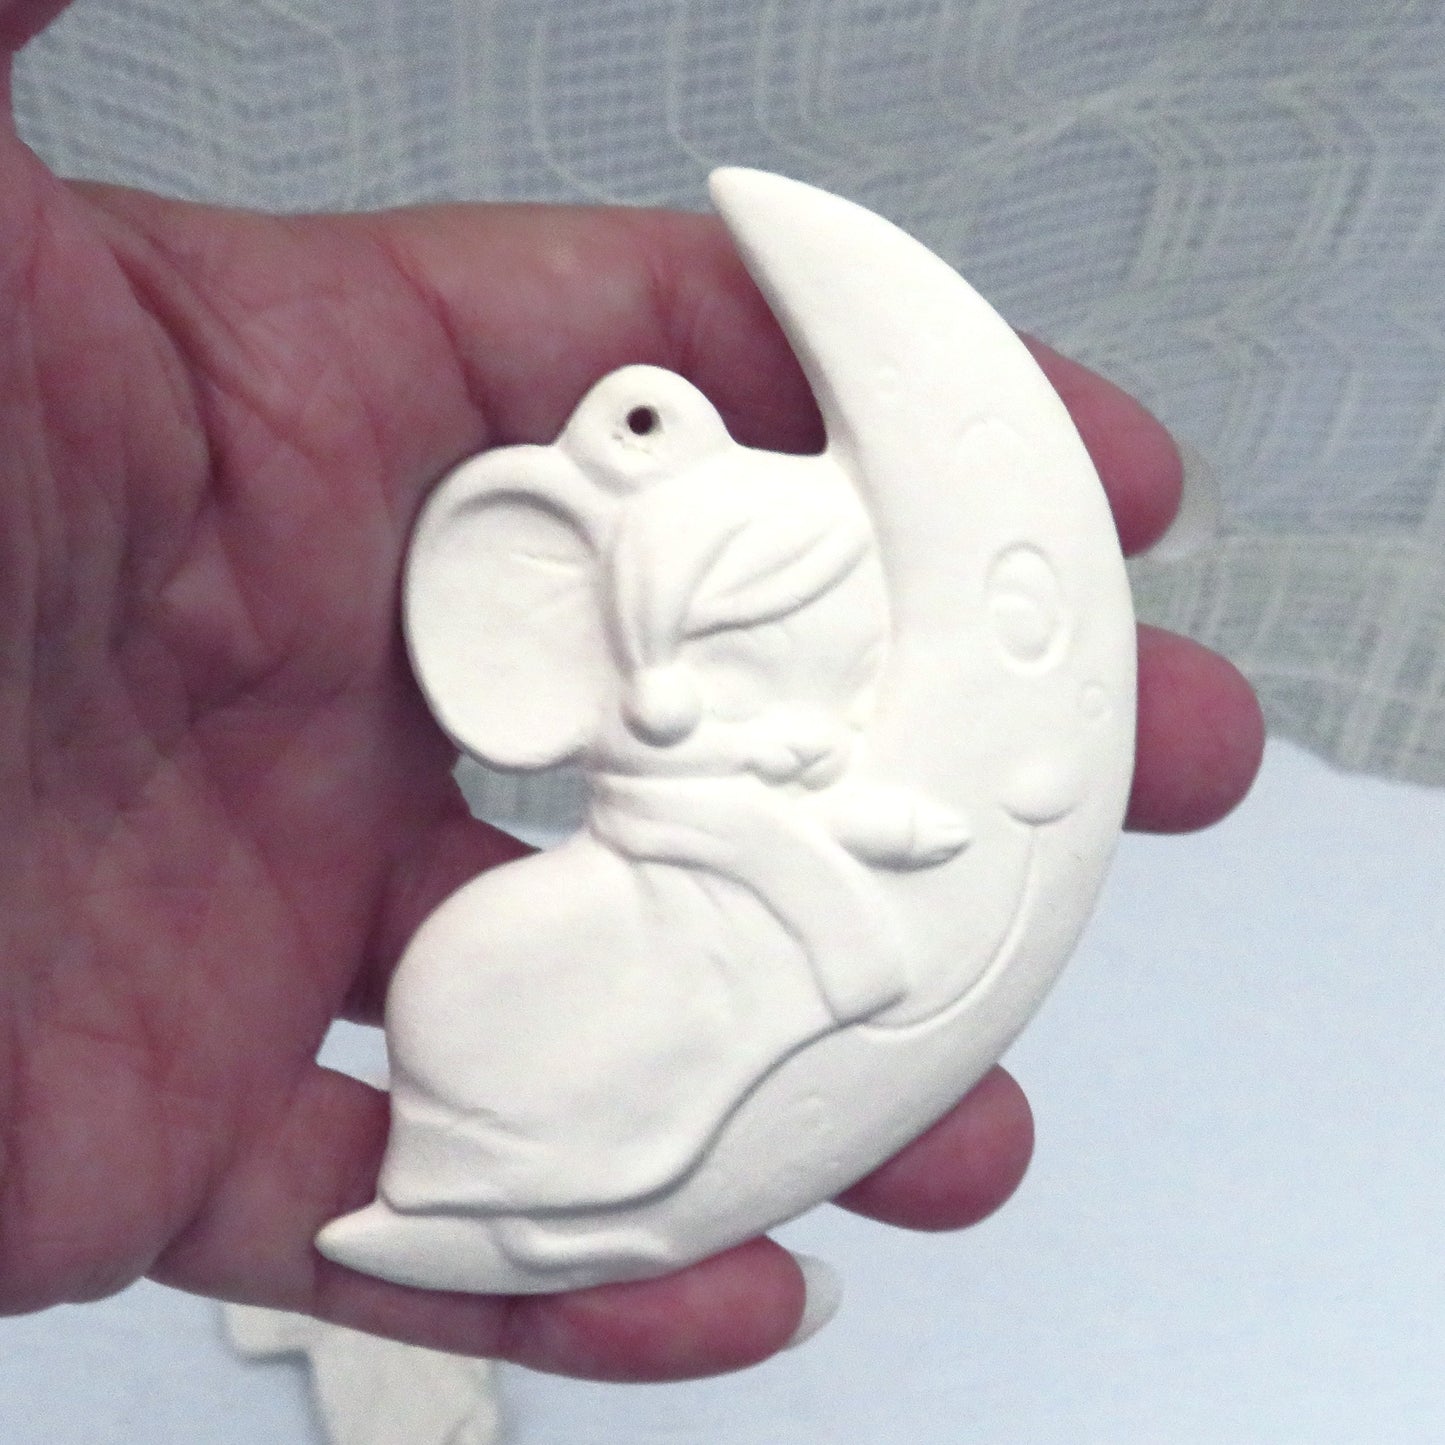 Handmade Ready to Paint Ceramic Christmas Tree Ornaments with a Mouse on a Moon and Mouse with a Harp, Paintable Ceramic Christmas Decor